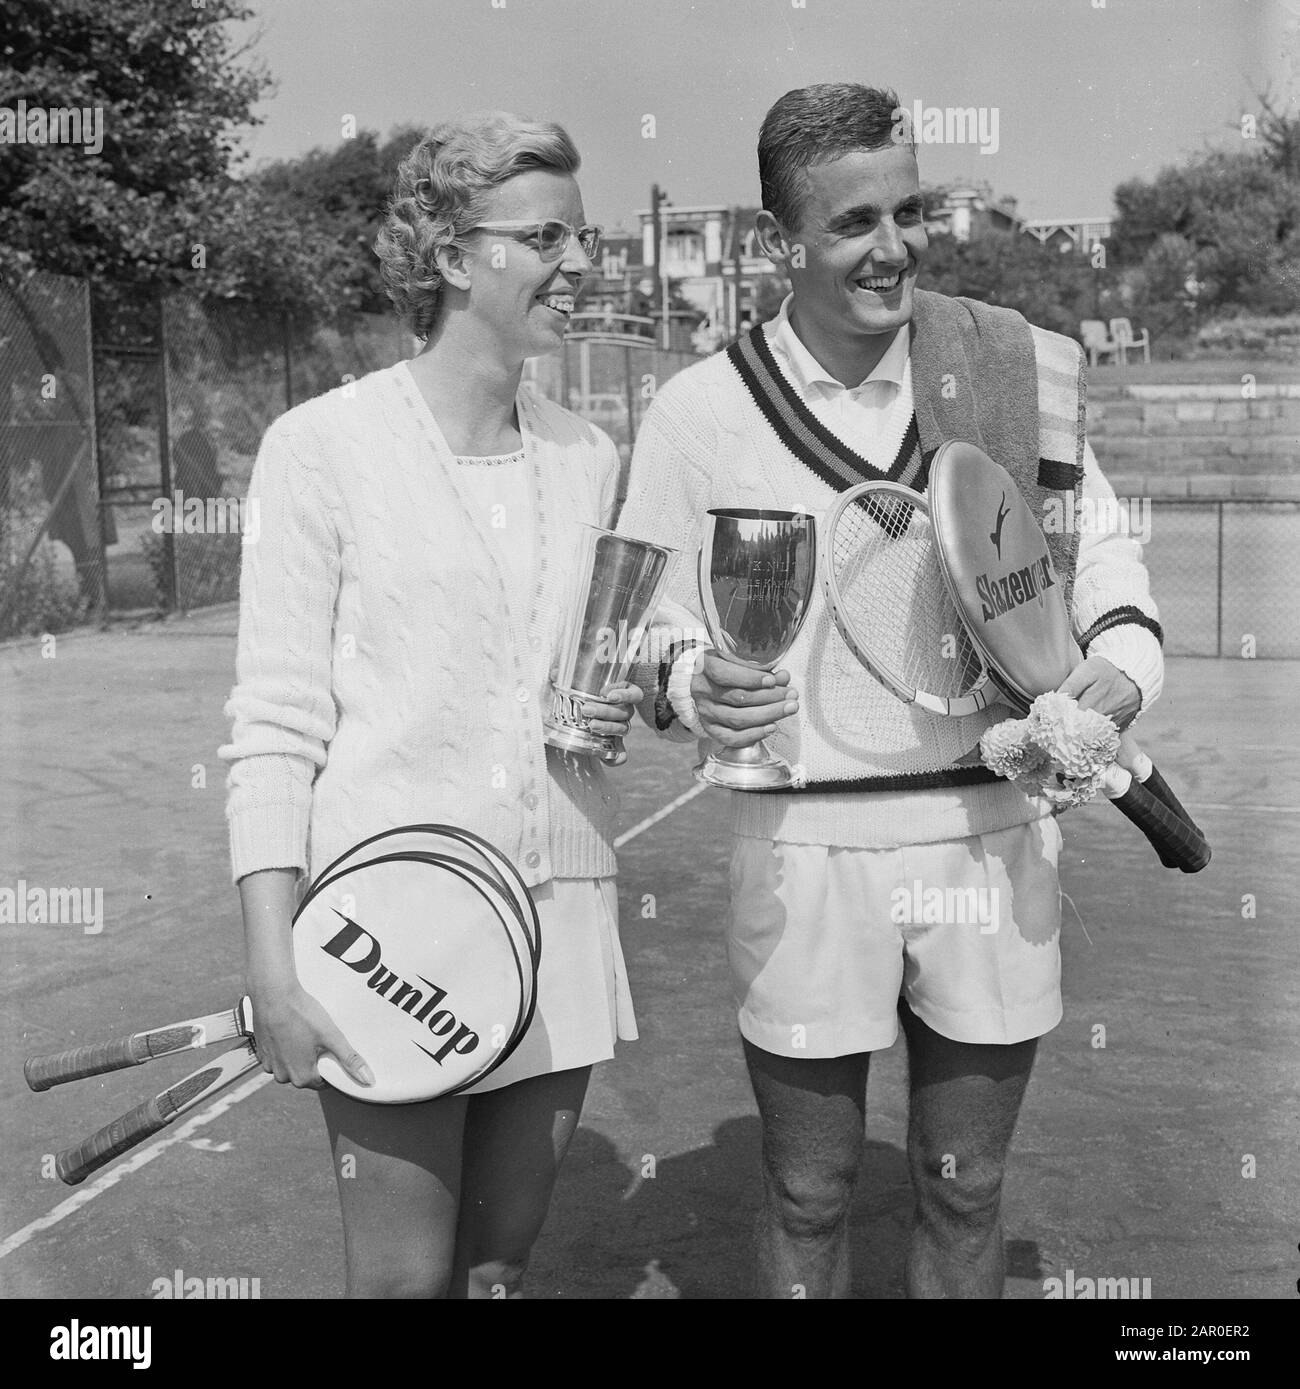 Tennis Championships Of The Netherlands Left Mrs Ridderhof Champion Ladies Ankle Right Jan Hayer Champion Men S Ankle Date 17 August 1963 Keywords Champions Tennis Championships Personal Name Jan Hayer Stock Photo Alamy